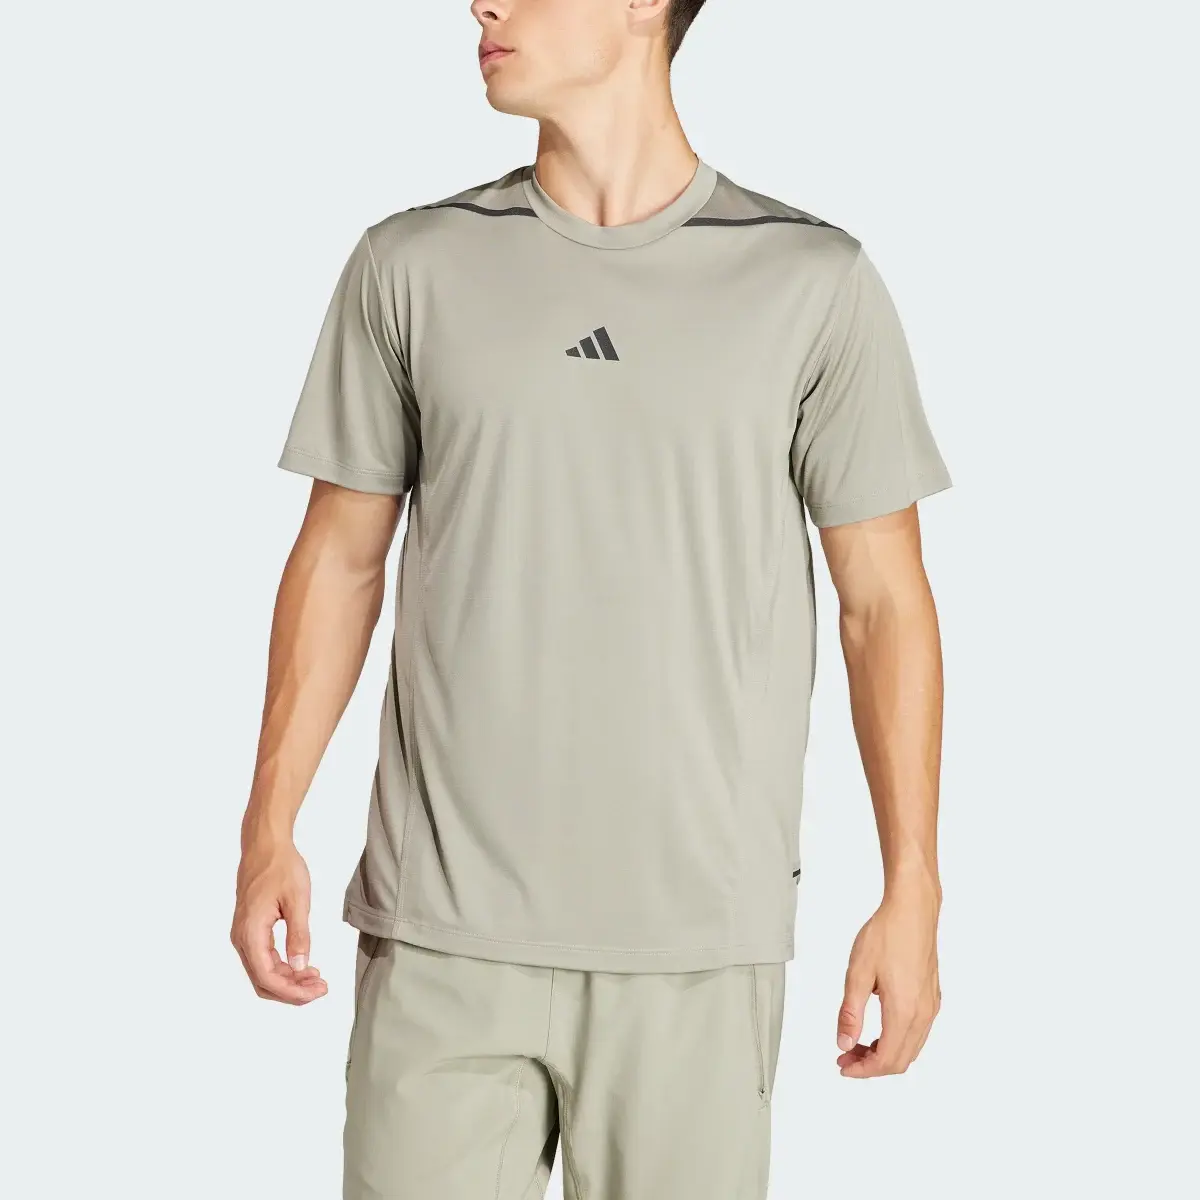 Adidas T-shirt Designed for Training adistrong Workout. 1